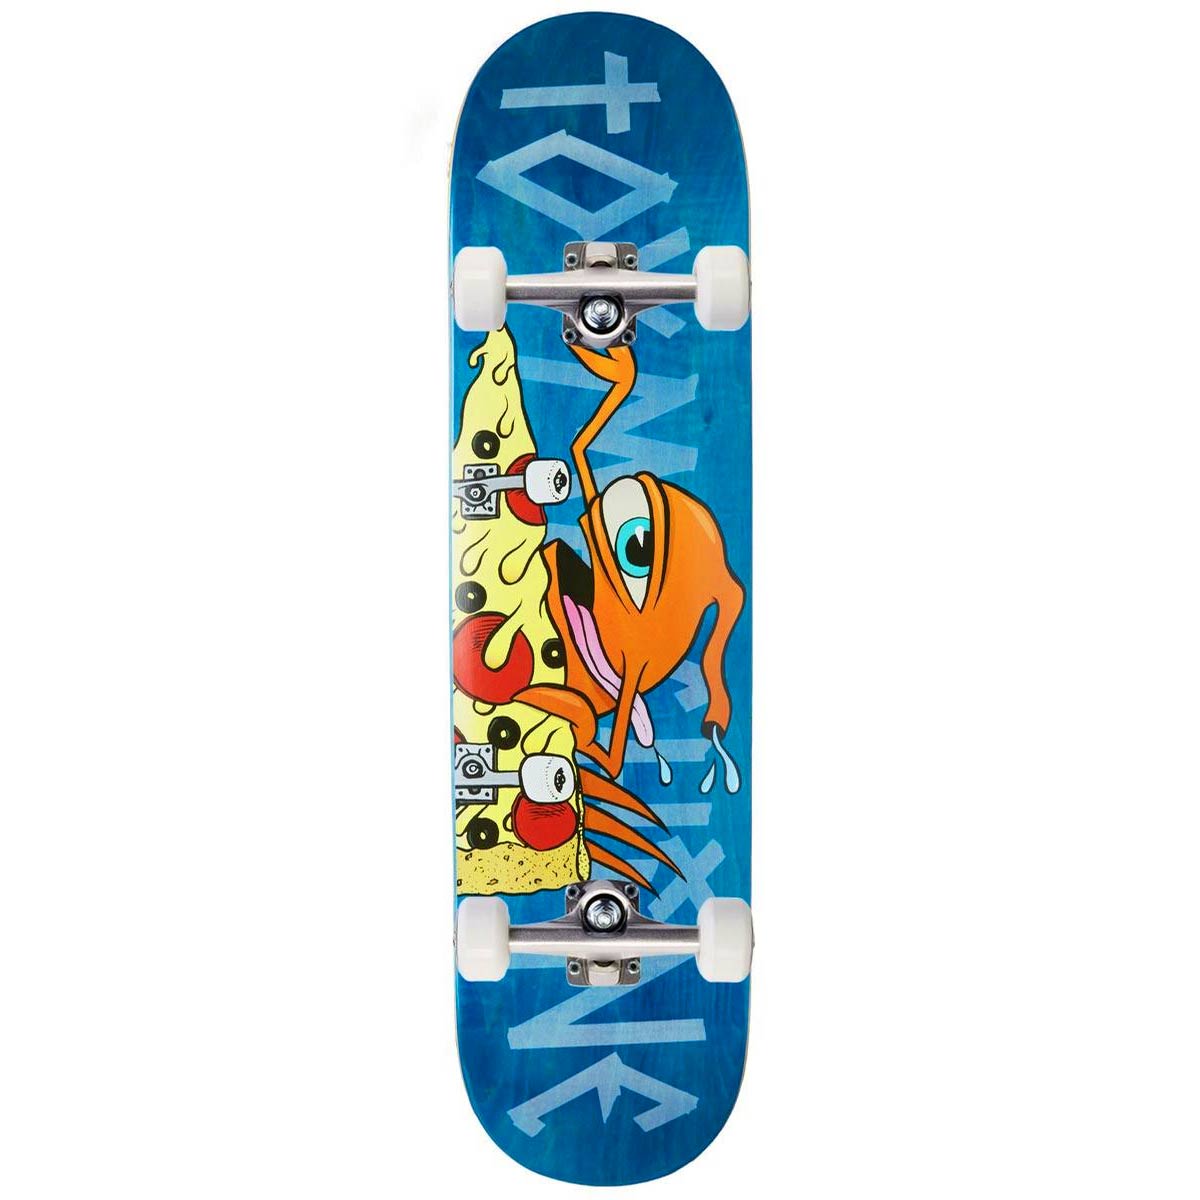 TOY MACHINE SKATEBOARDS CHARACTERS 7.75" INCH SKATEBOARD DECK NEW FREE GRIP 